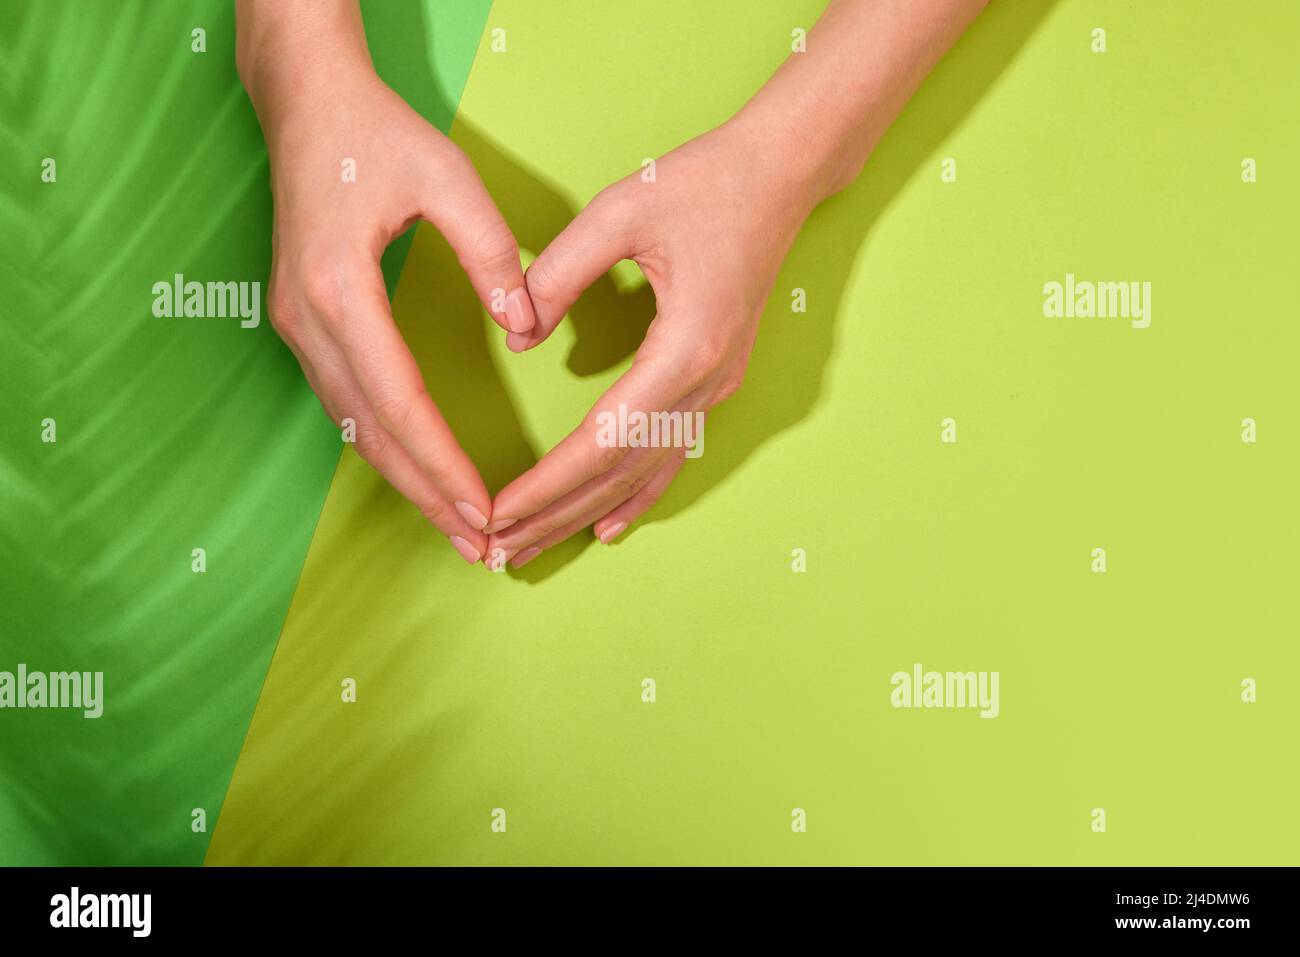 Female hands with natural manicure nails making heart symbol on green background shadow of plant background Stock Photo